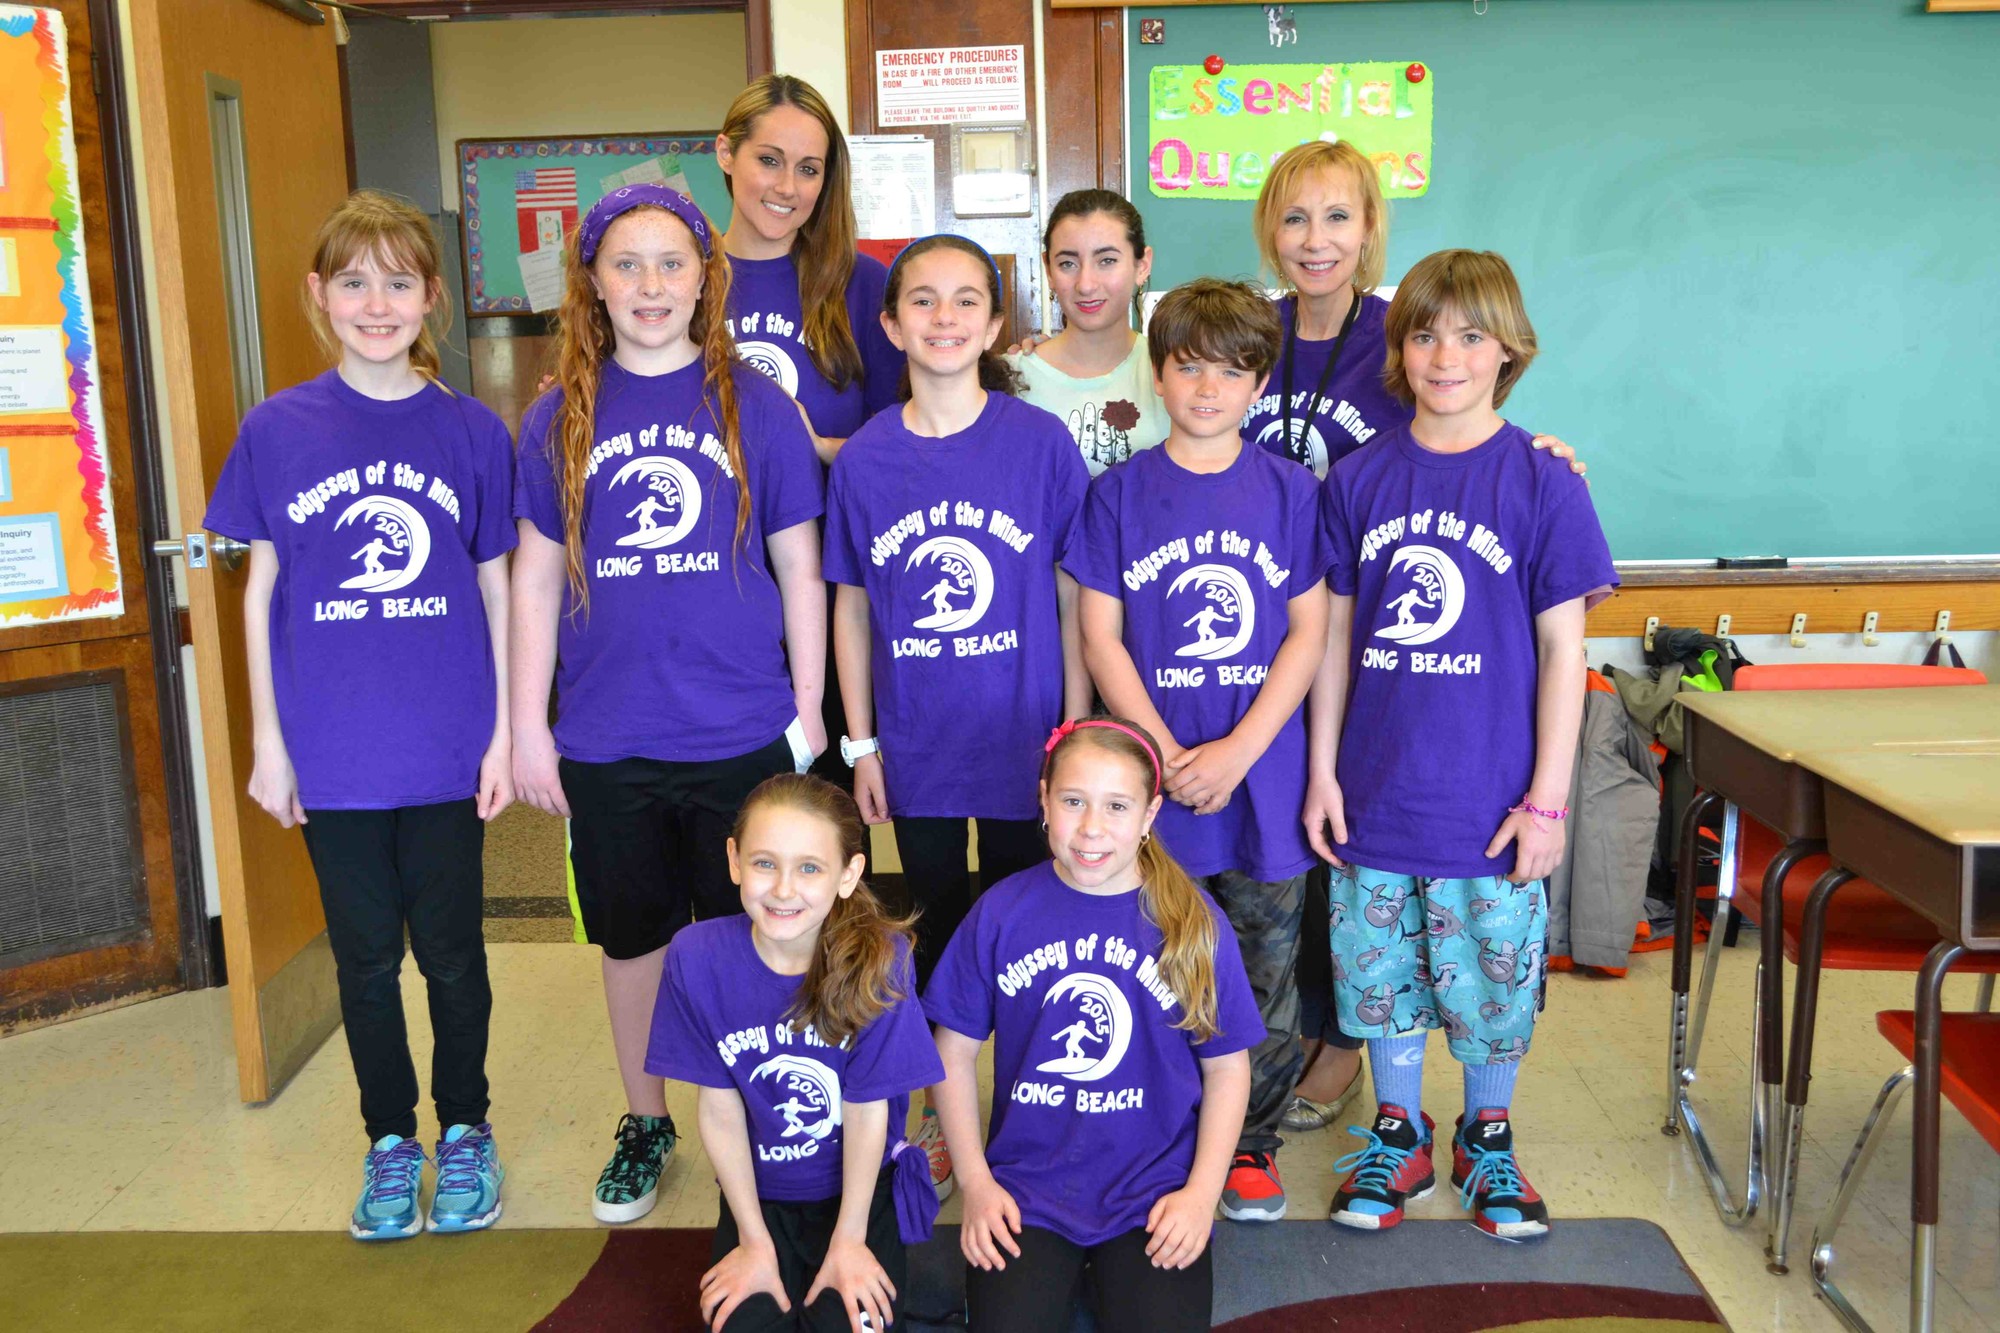 Front kneeling, Maryn Ascher, left, and Gabrielle Pine along with standing teammates Ariana Thomas, left, Sarah Gusler, Samantha Breen, Matthew O’Connor and Skyler Oberlander and their instructors Dr. Caitlin Fuentes, left, high school student volunteer Charlotte Kasper and Beverlee Bertinetti.